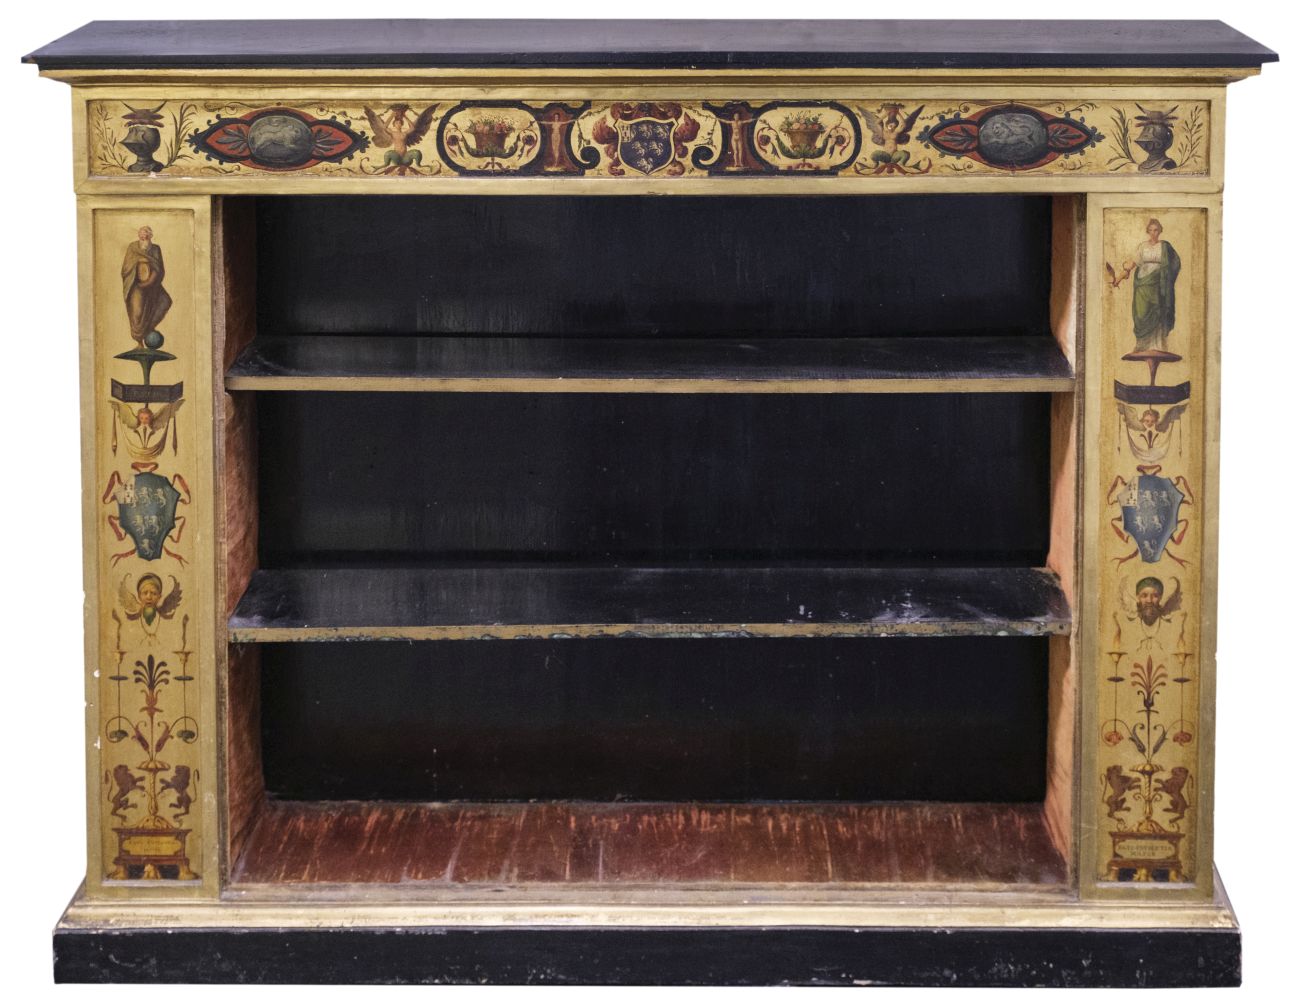 Bookcase. A Victorian Classical influence painted wood bookcase